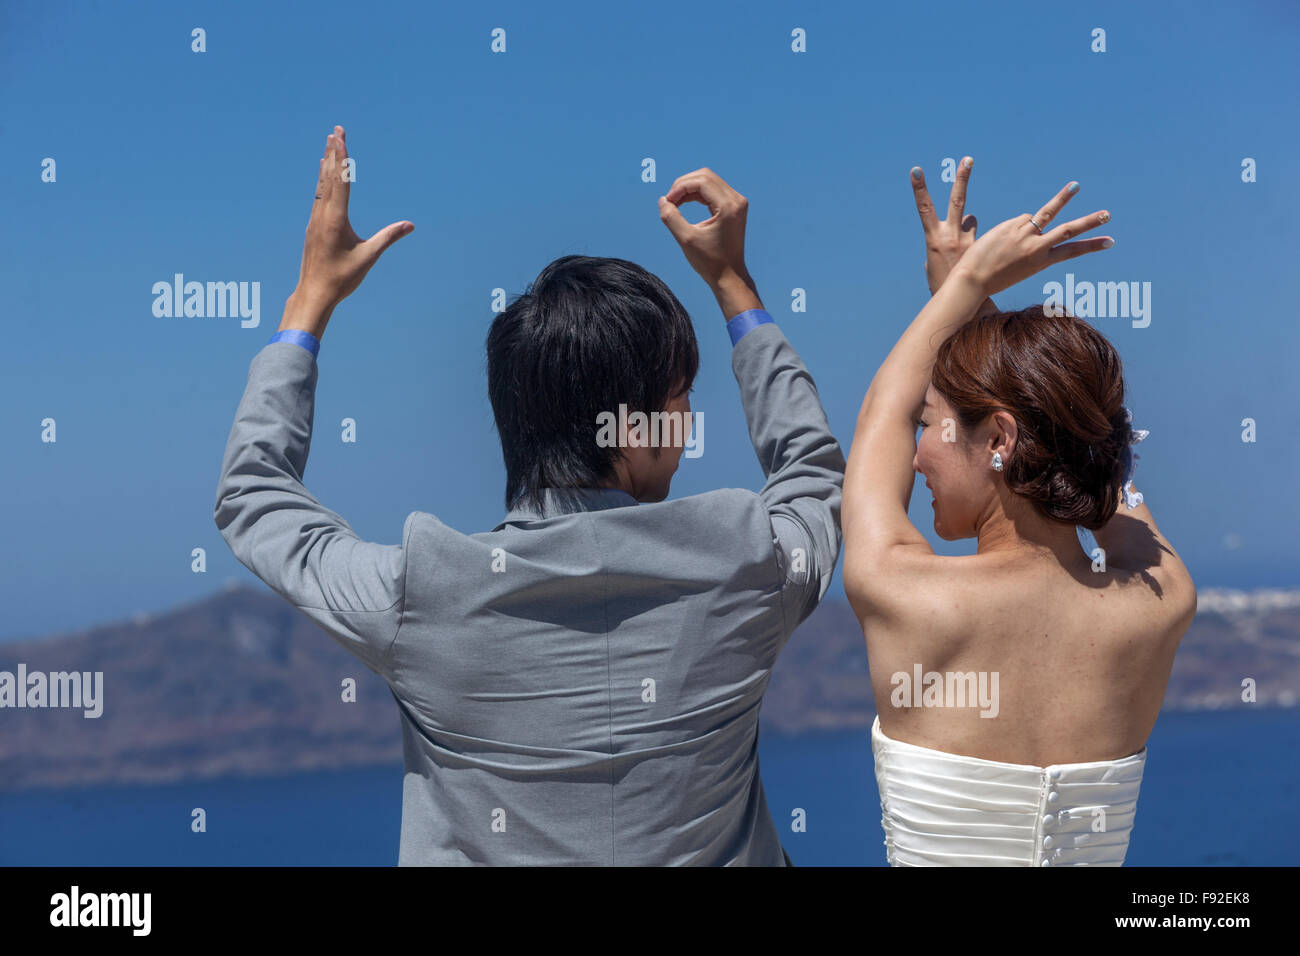 Inscription Love, Young Asian people just married, Santorini couple rear view, Greek island, Greece Stock Photo